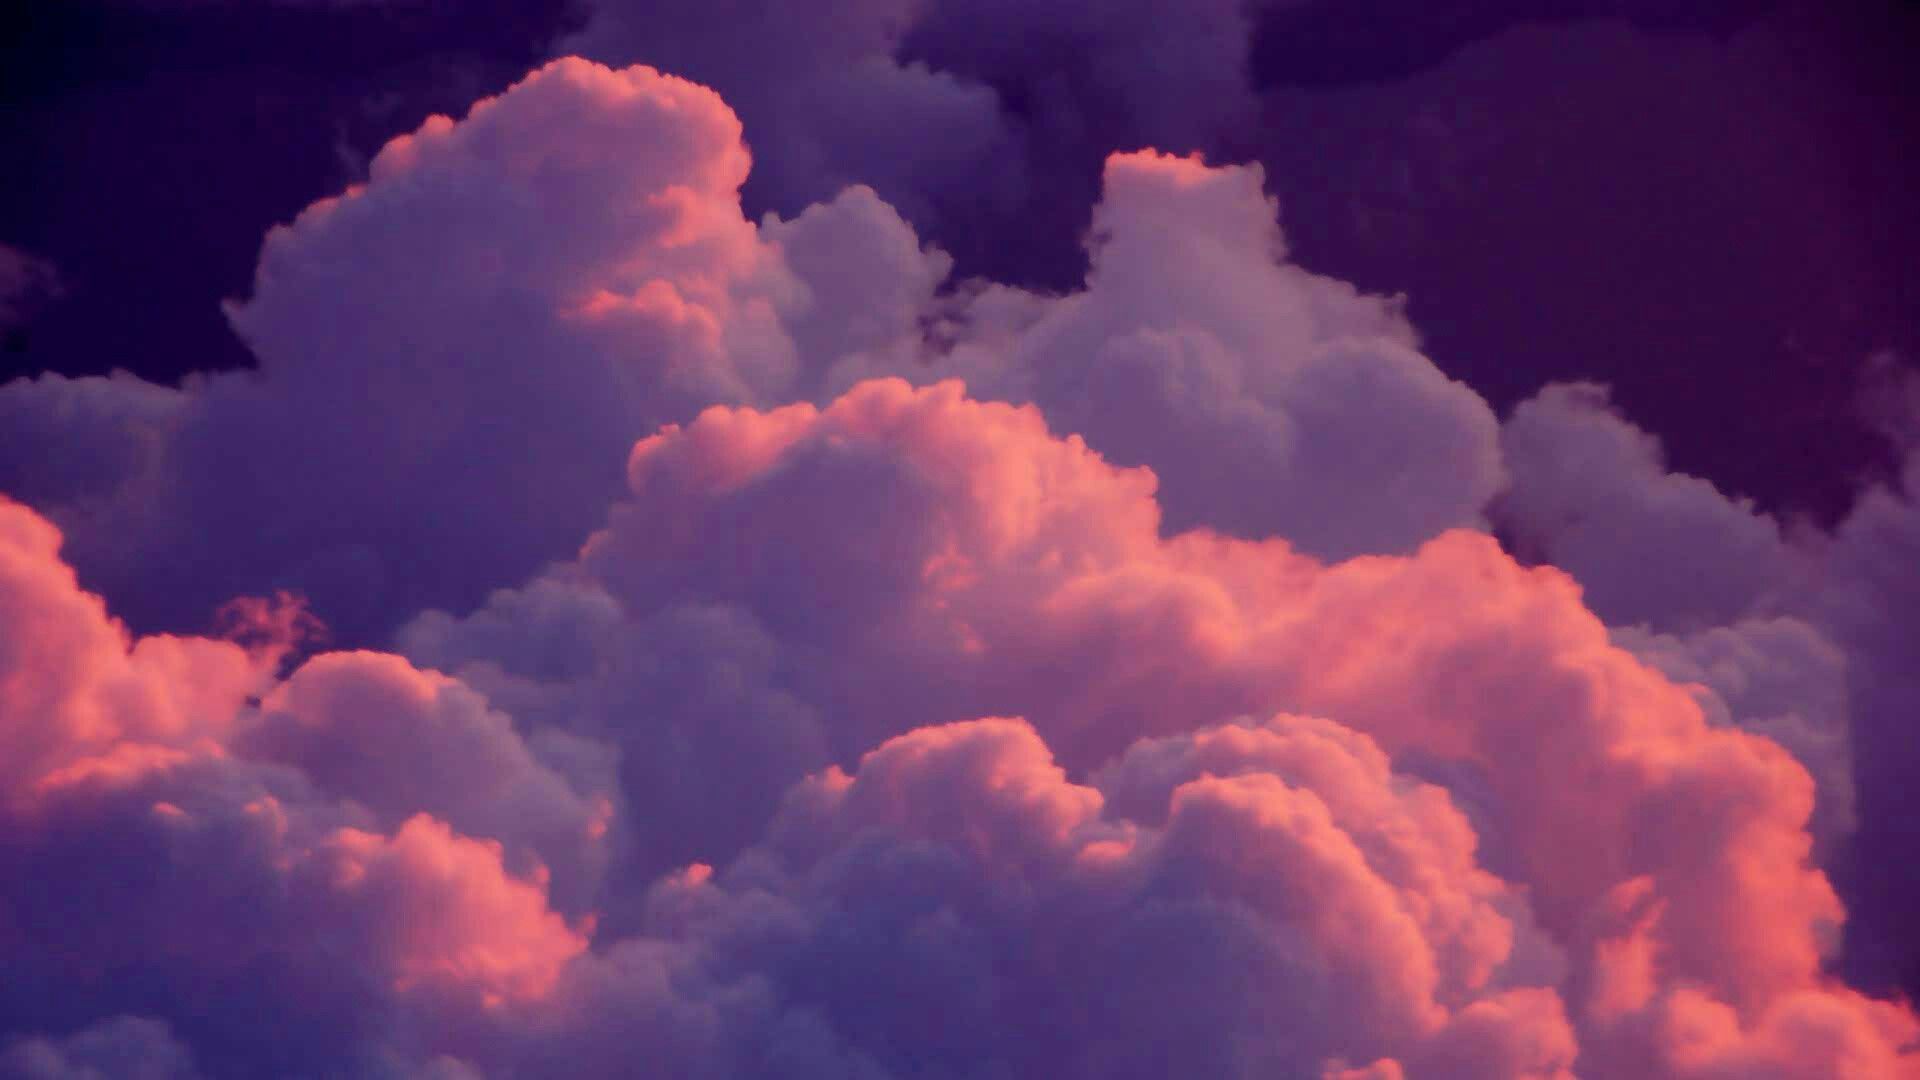 Aesthetic Clouds Hd Landscape Wallpapers